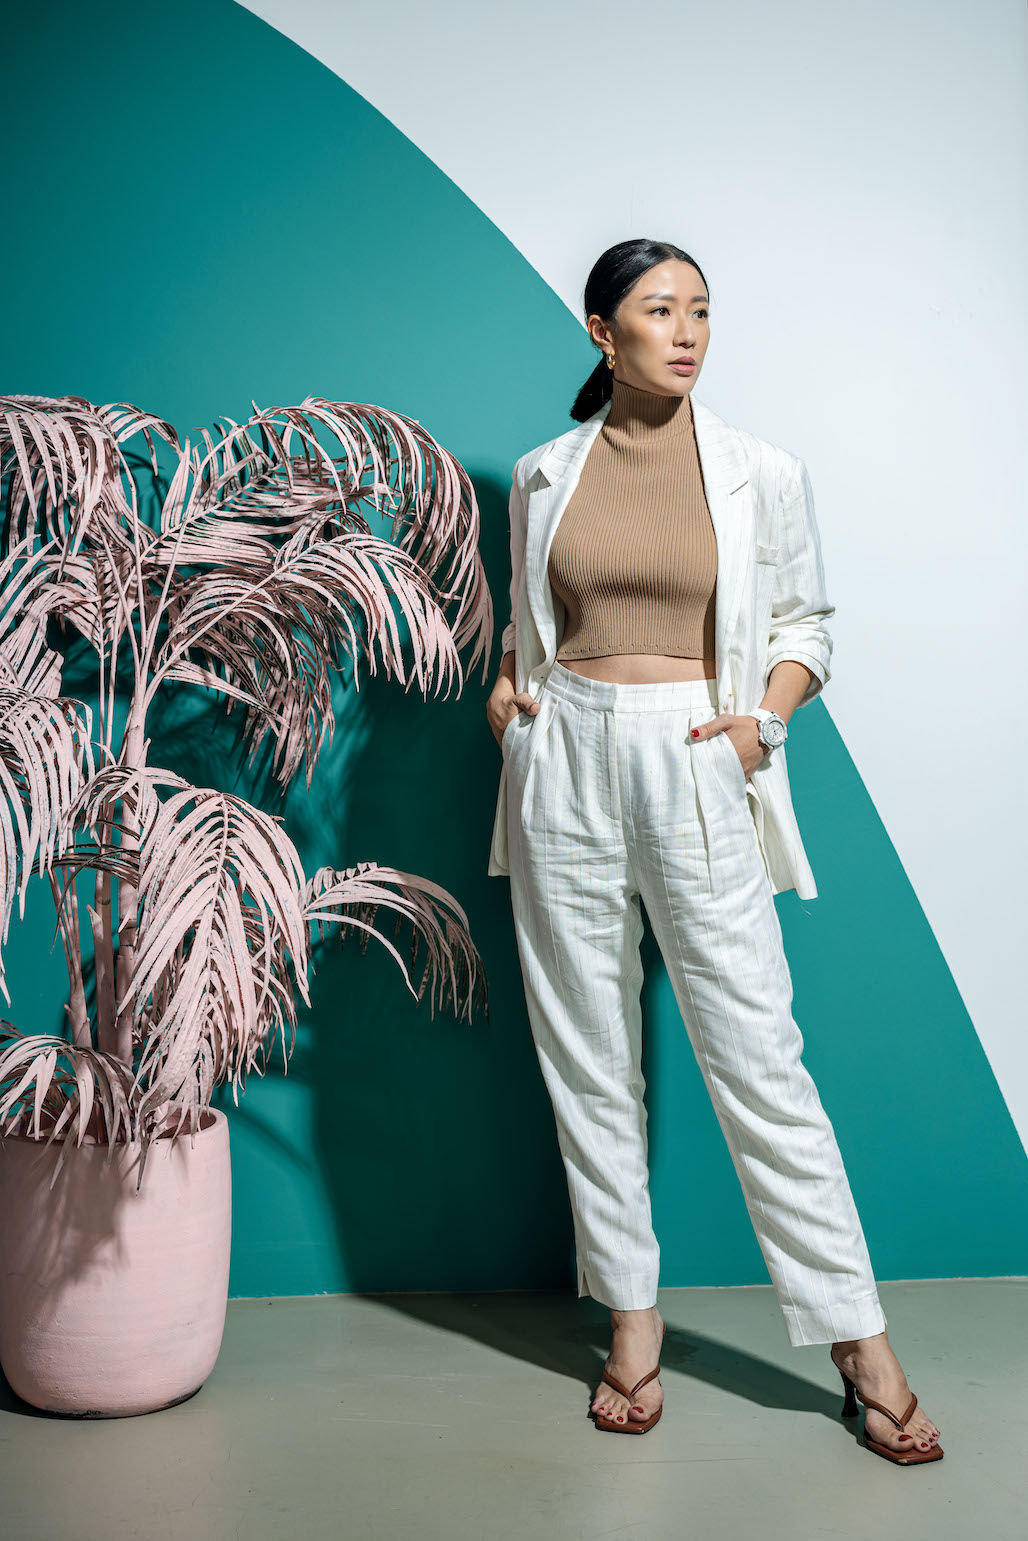 Rachel Lim of Love, Bonito on Designing for Real Women